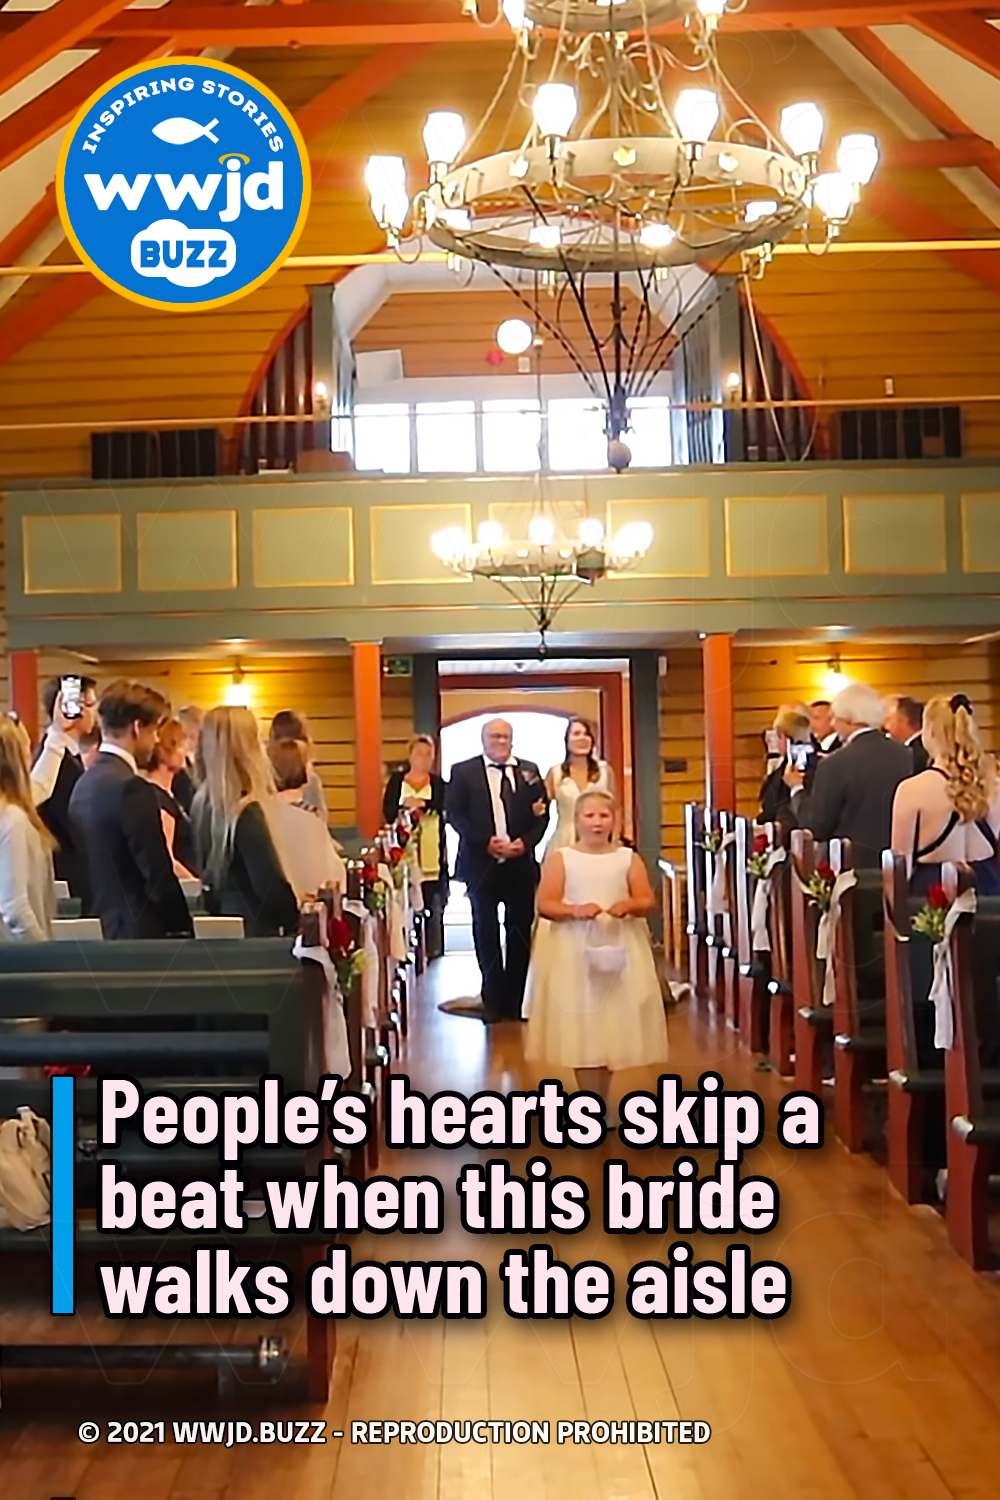 People’s hearts skip a beat when this bride walks down the aisle